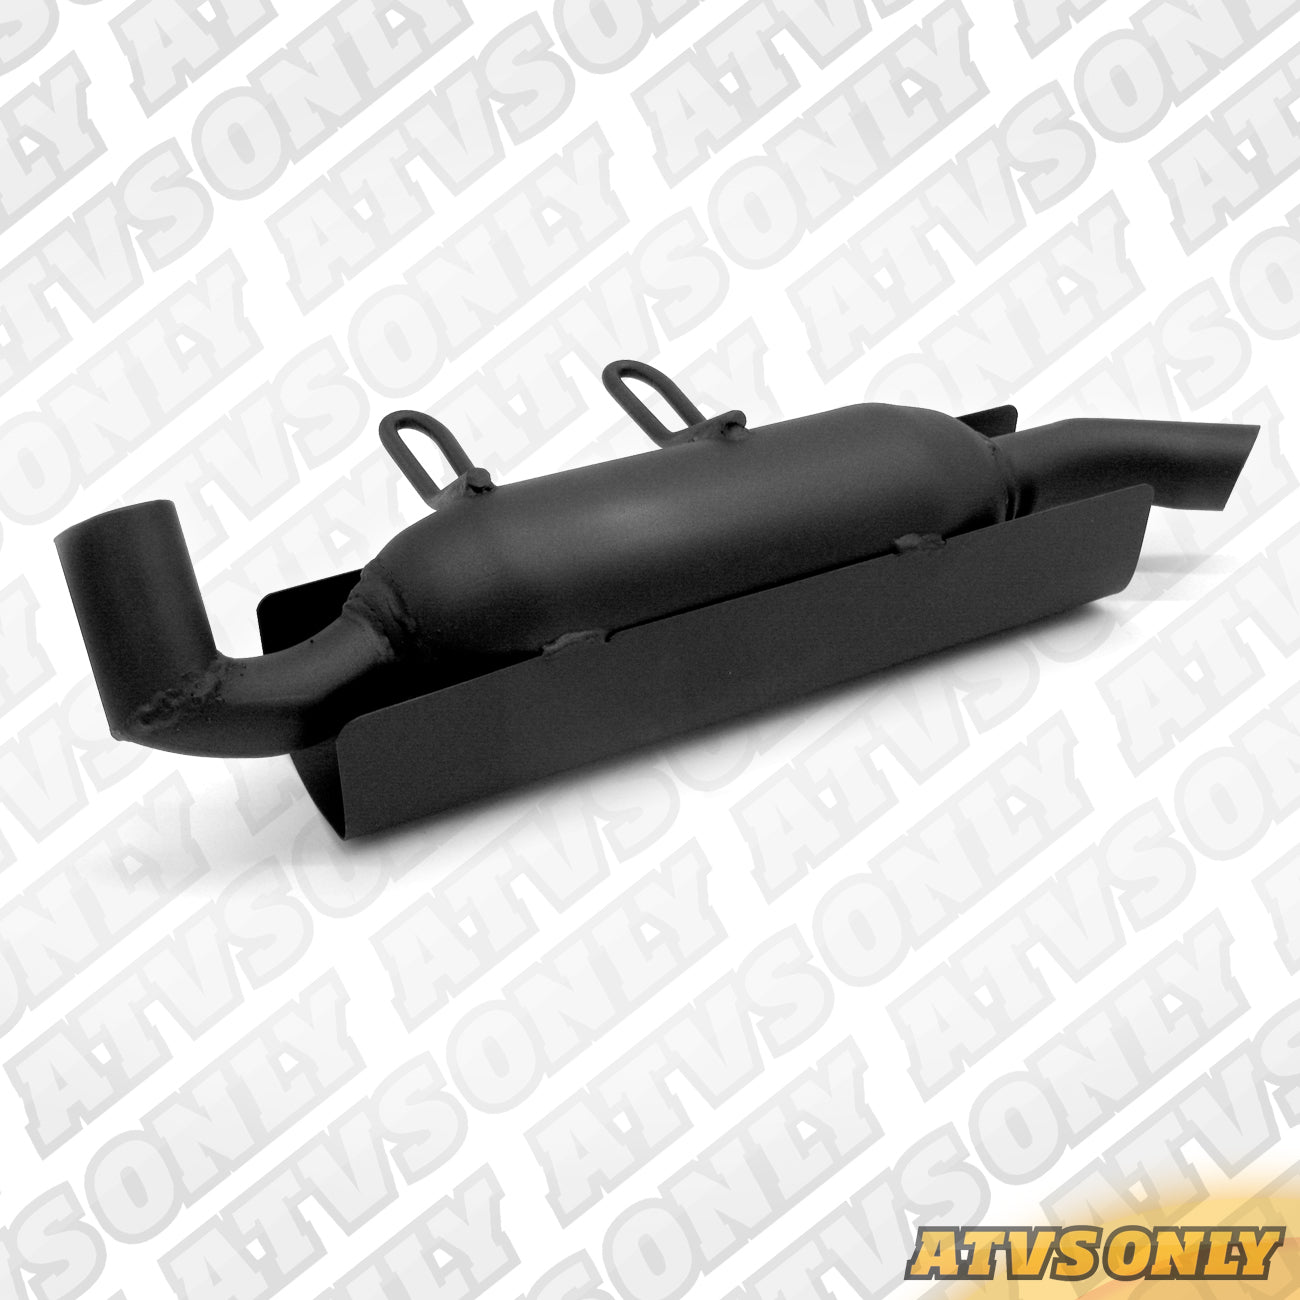 Exhaust – Benz Silent Rider Auxiliary Muffler for Polaris Applications